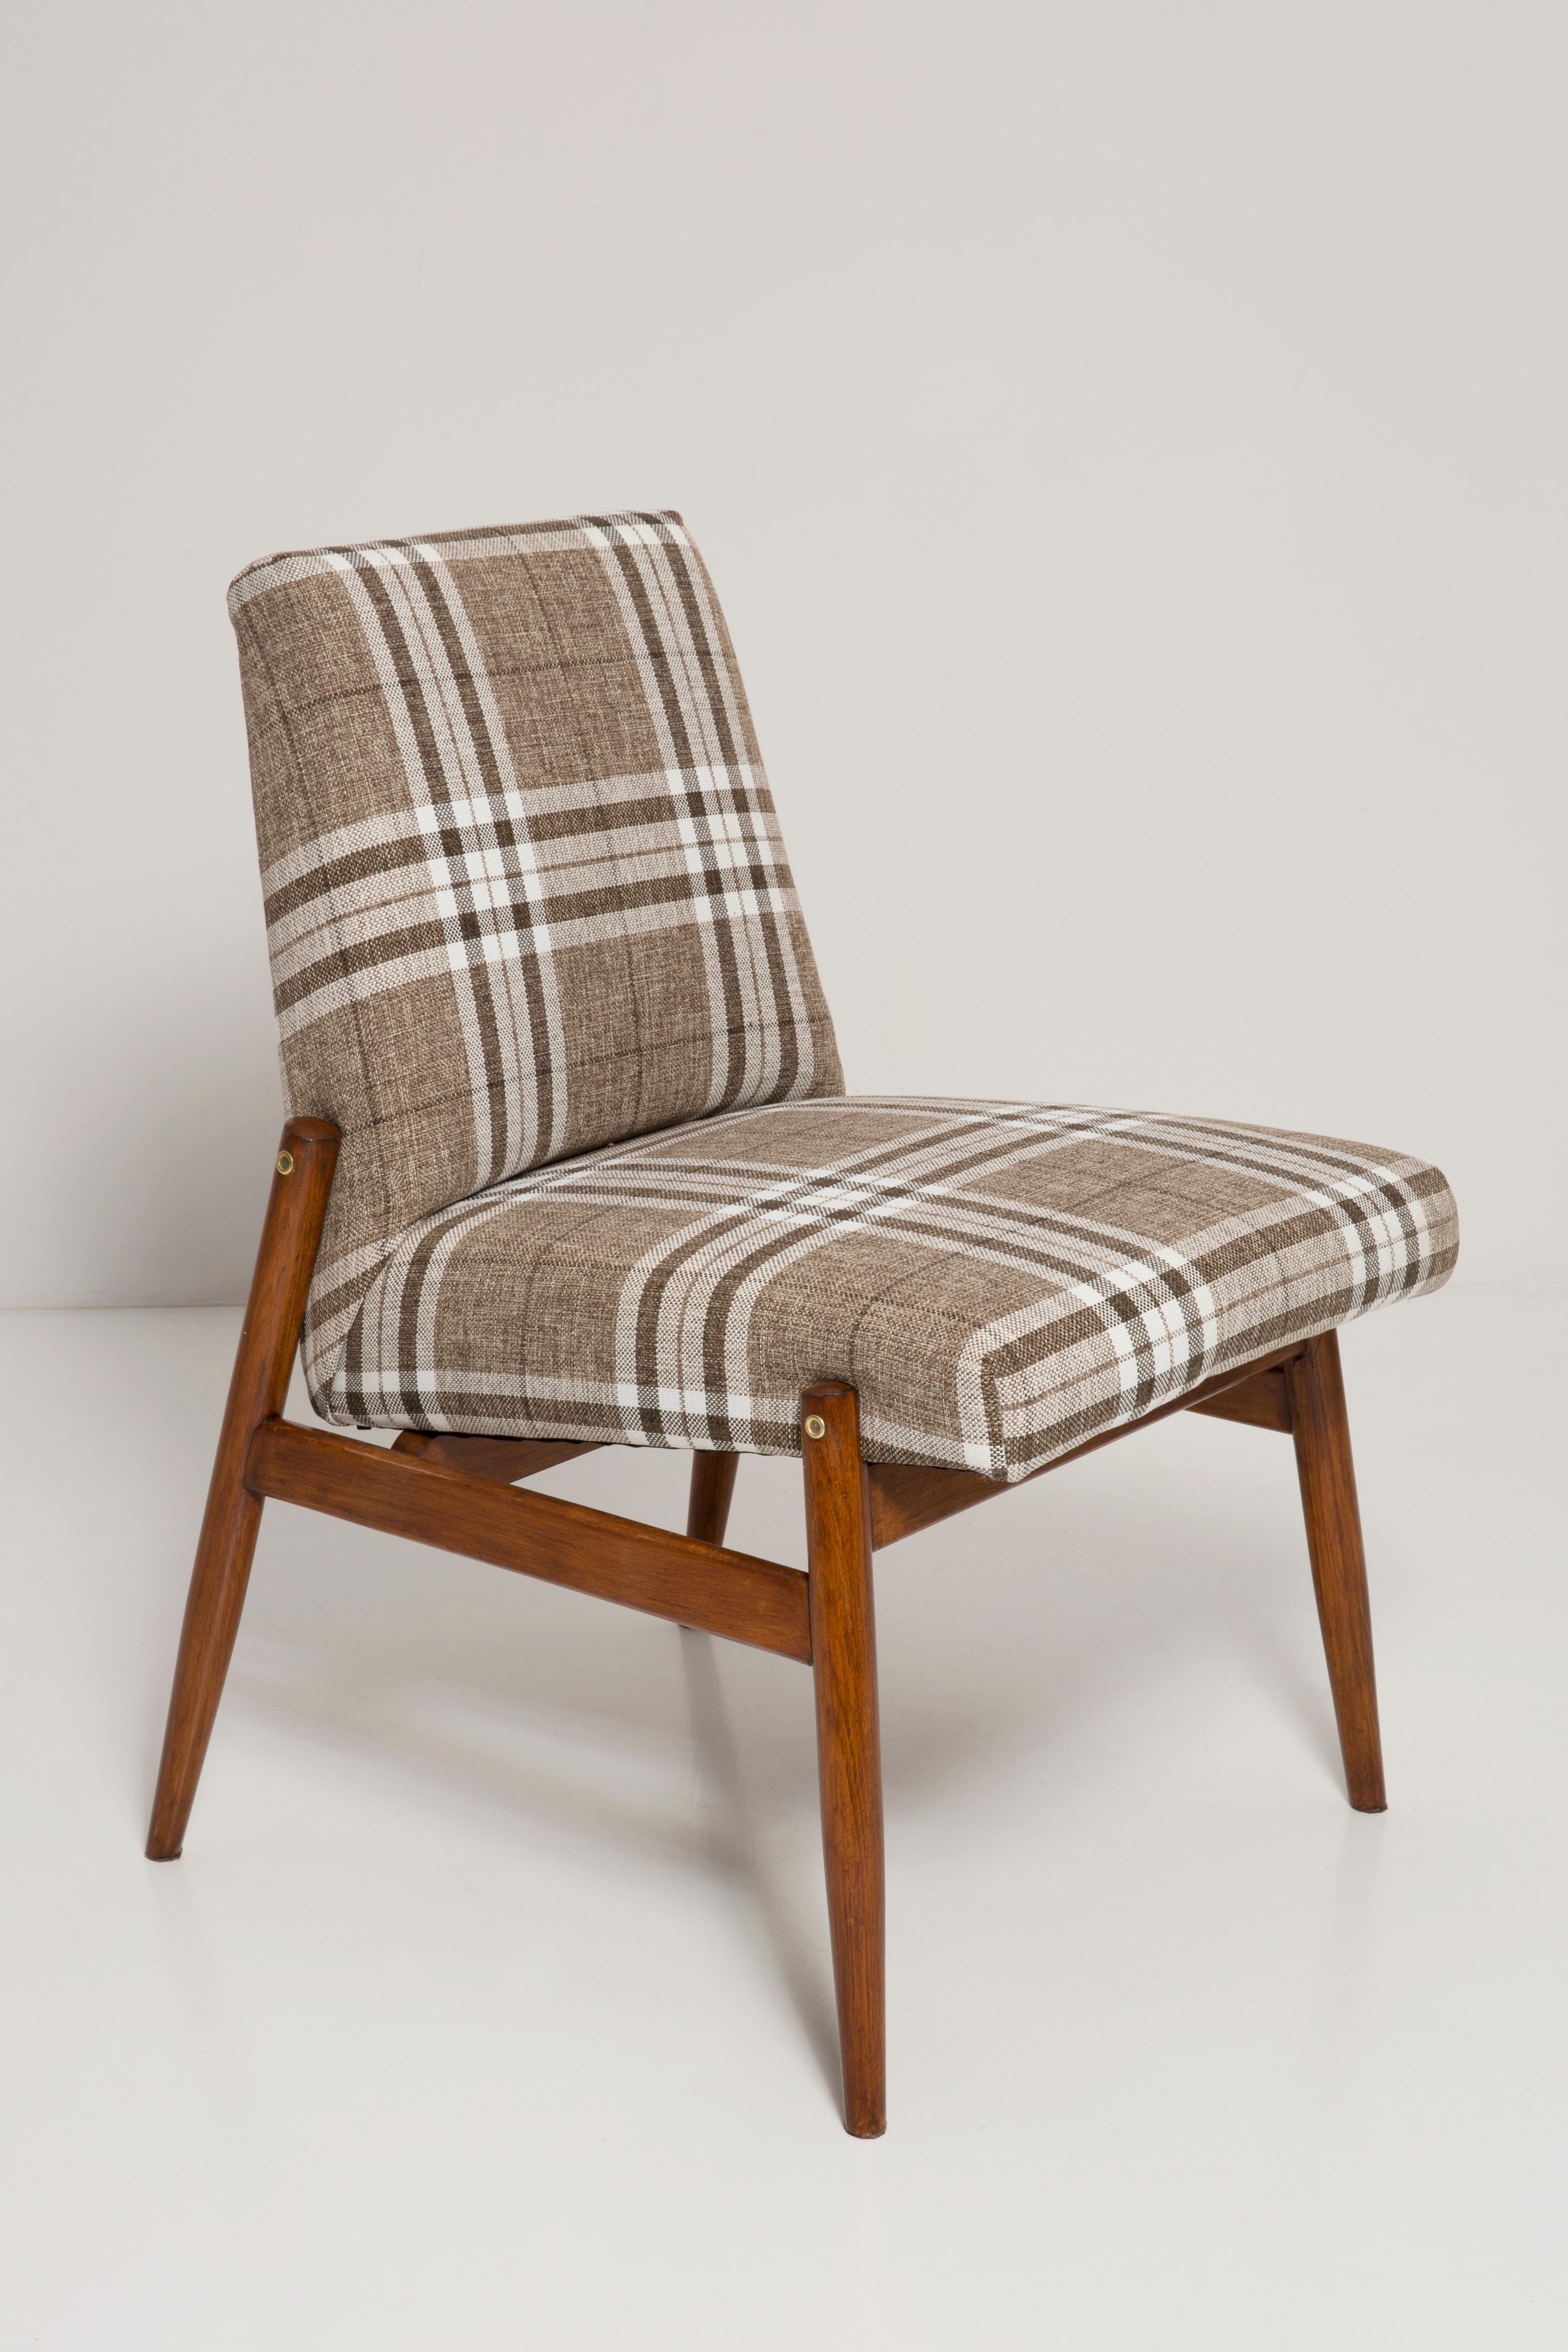 Mid-Century Modern Pair of Midcentury Beige Checkered Fabric Armchairs, Europe, 1960s For Sale